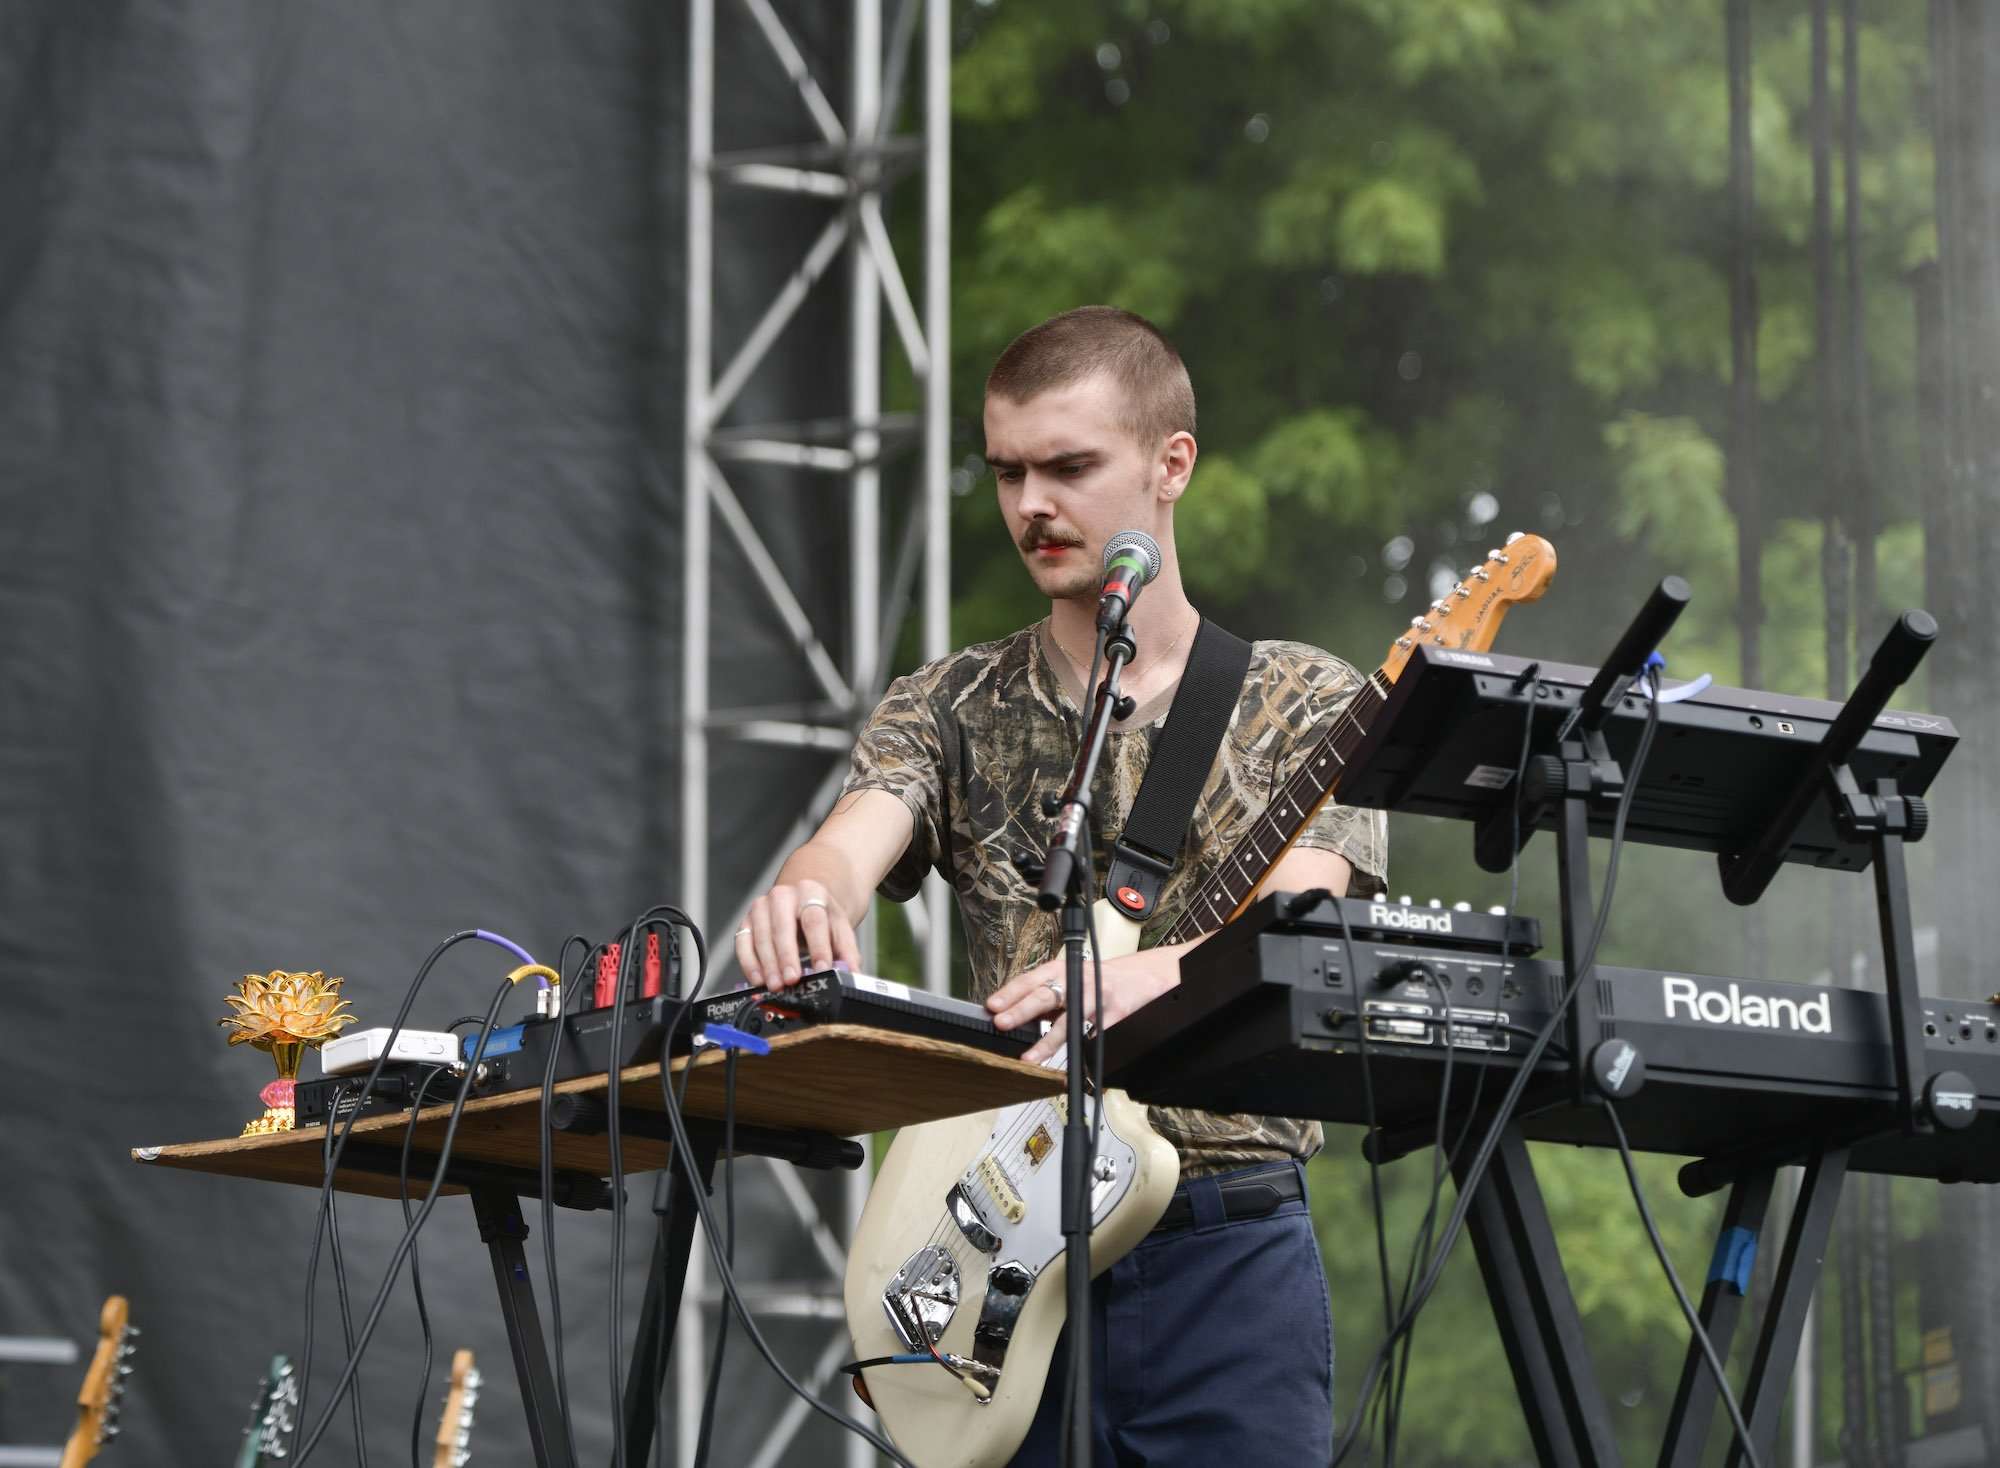 Spirit Of The Beehive Live At Pitchfork [GALLERY] 1